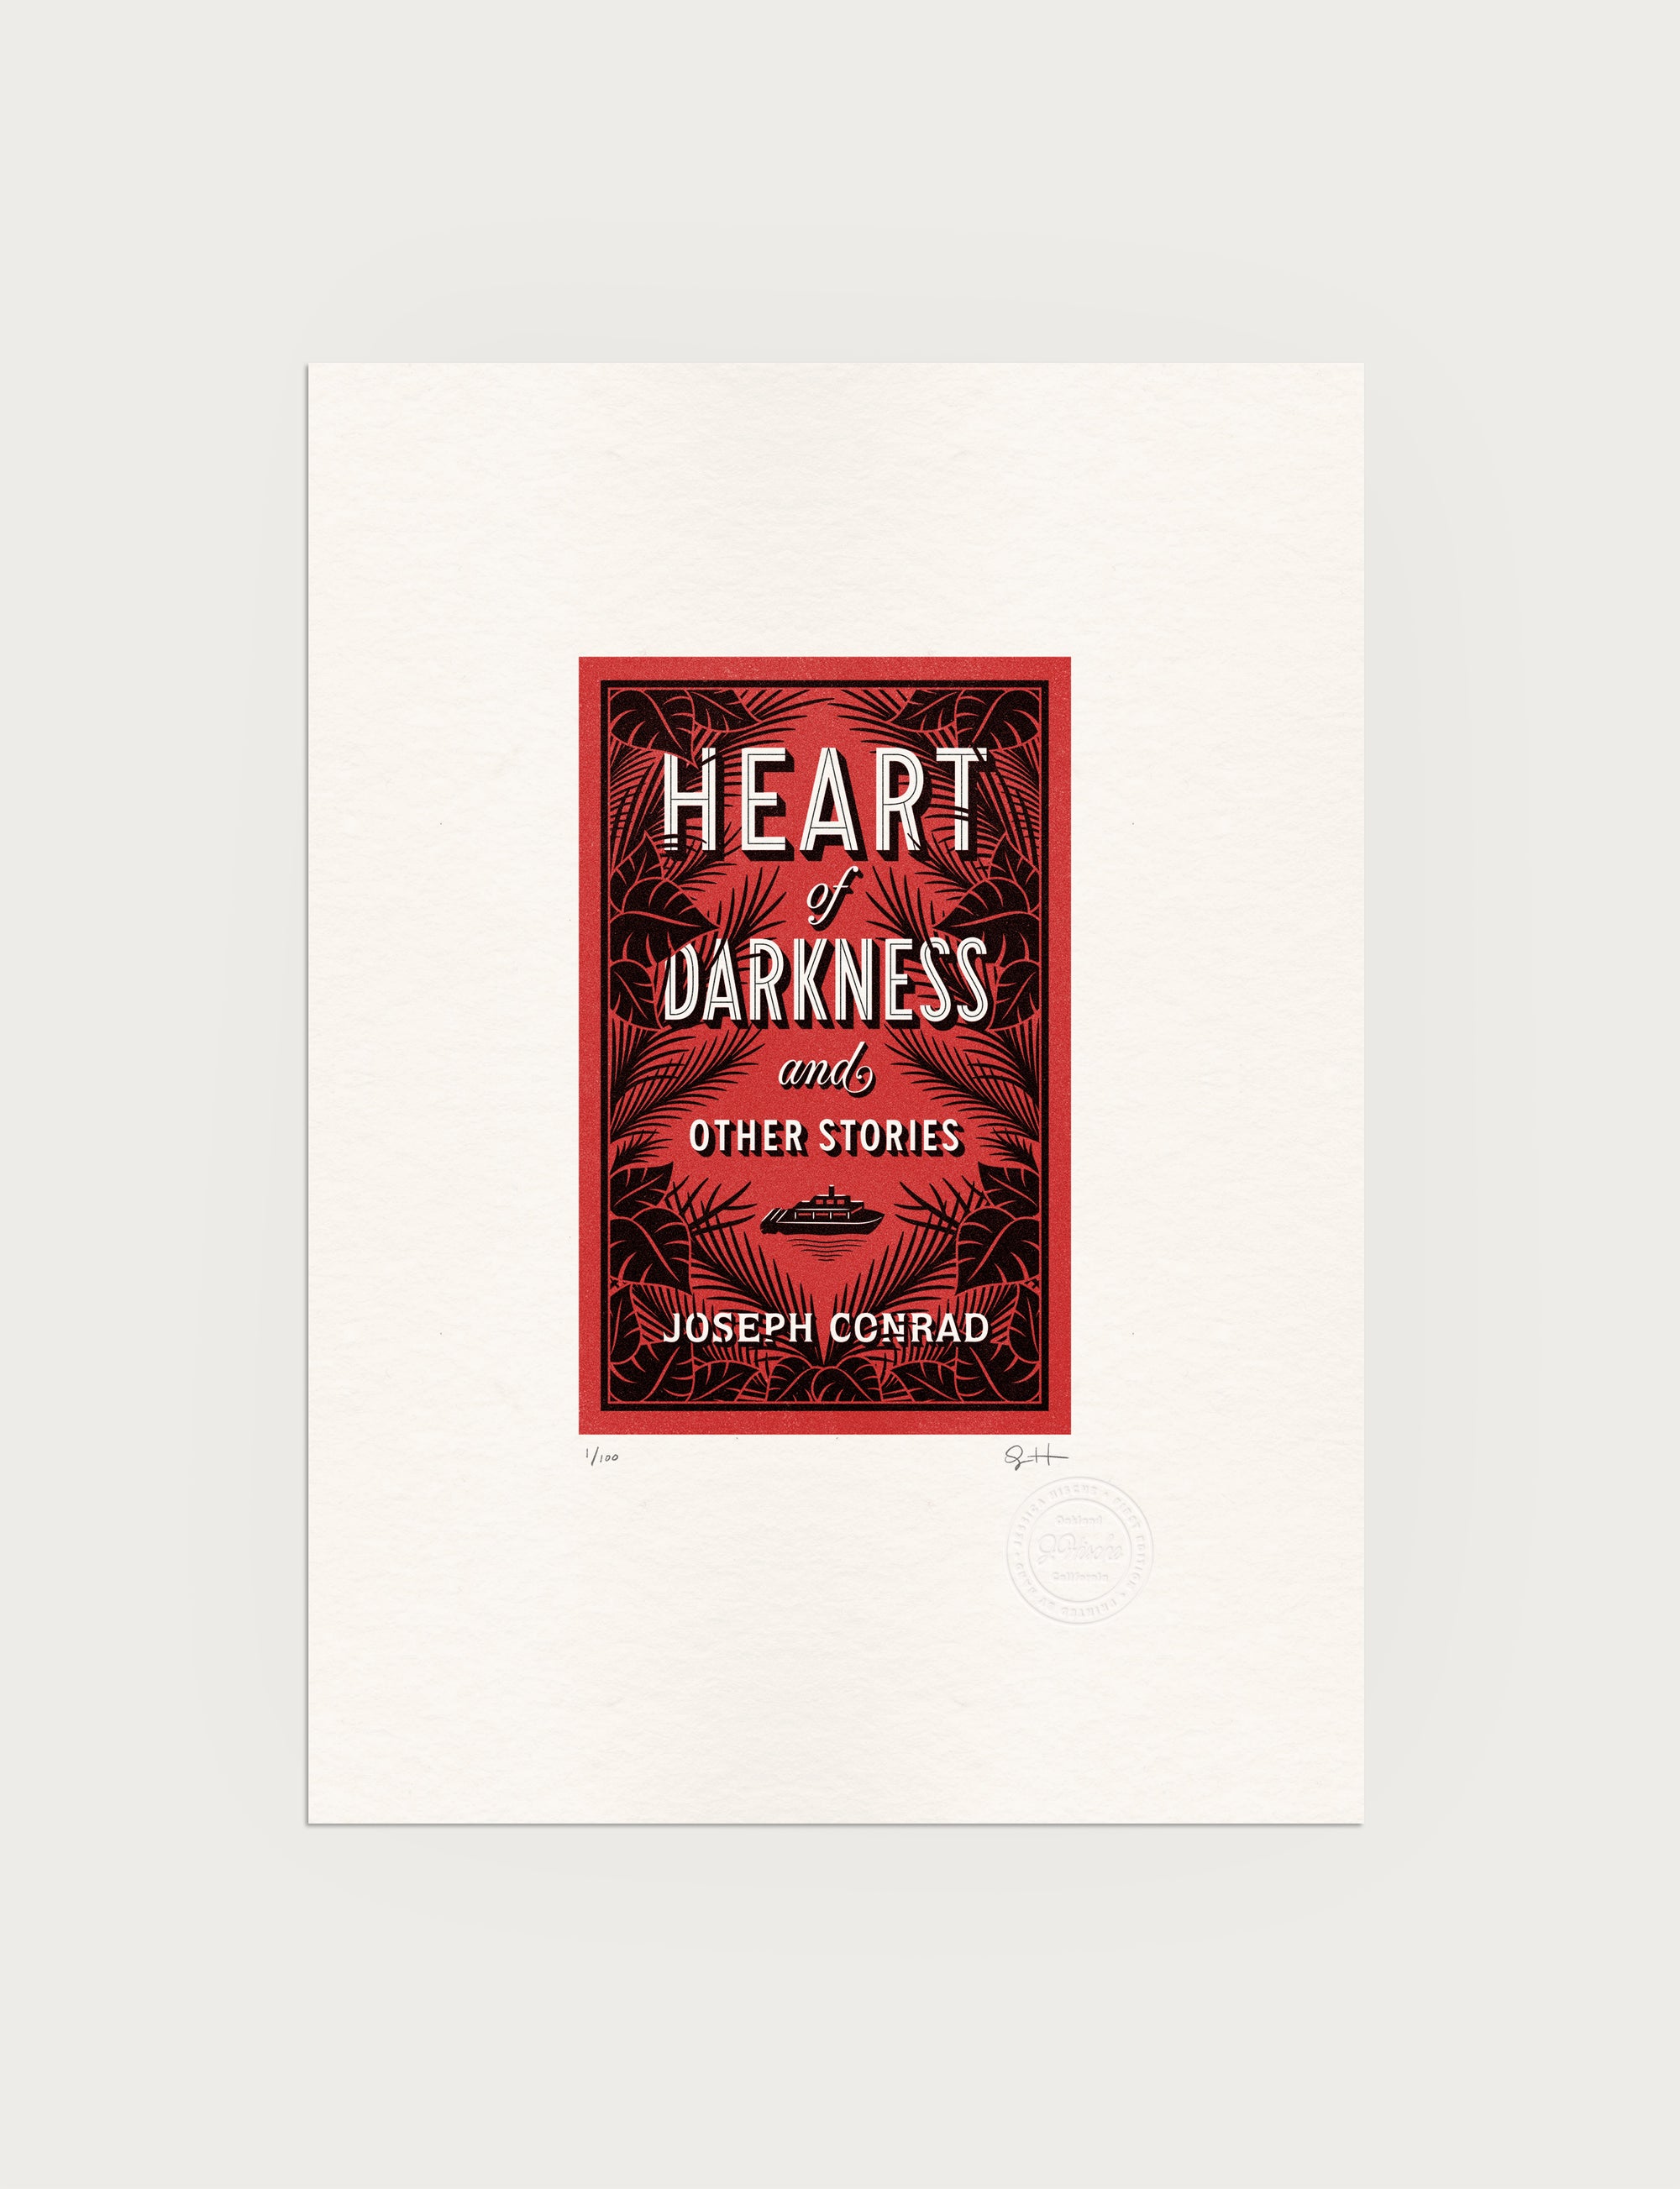 2-color letterpress print in red and black. Printed artwork is an illustrated book cover of Heart of Darkness including custom hand lettering.